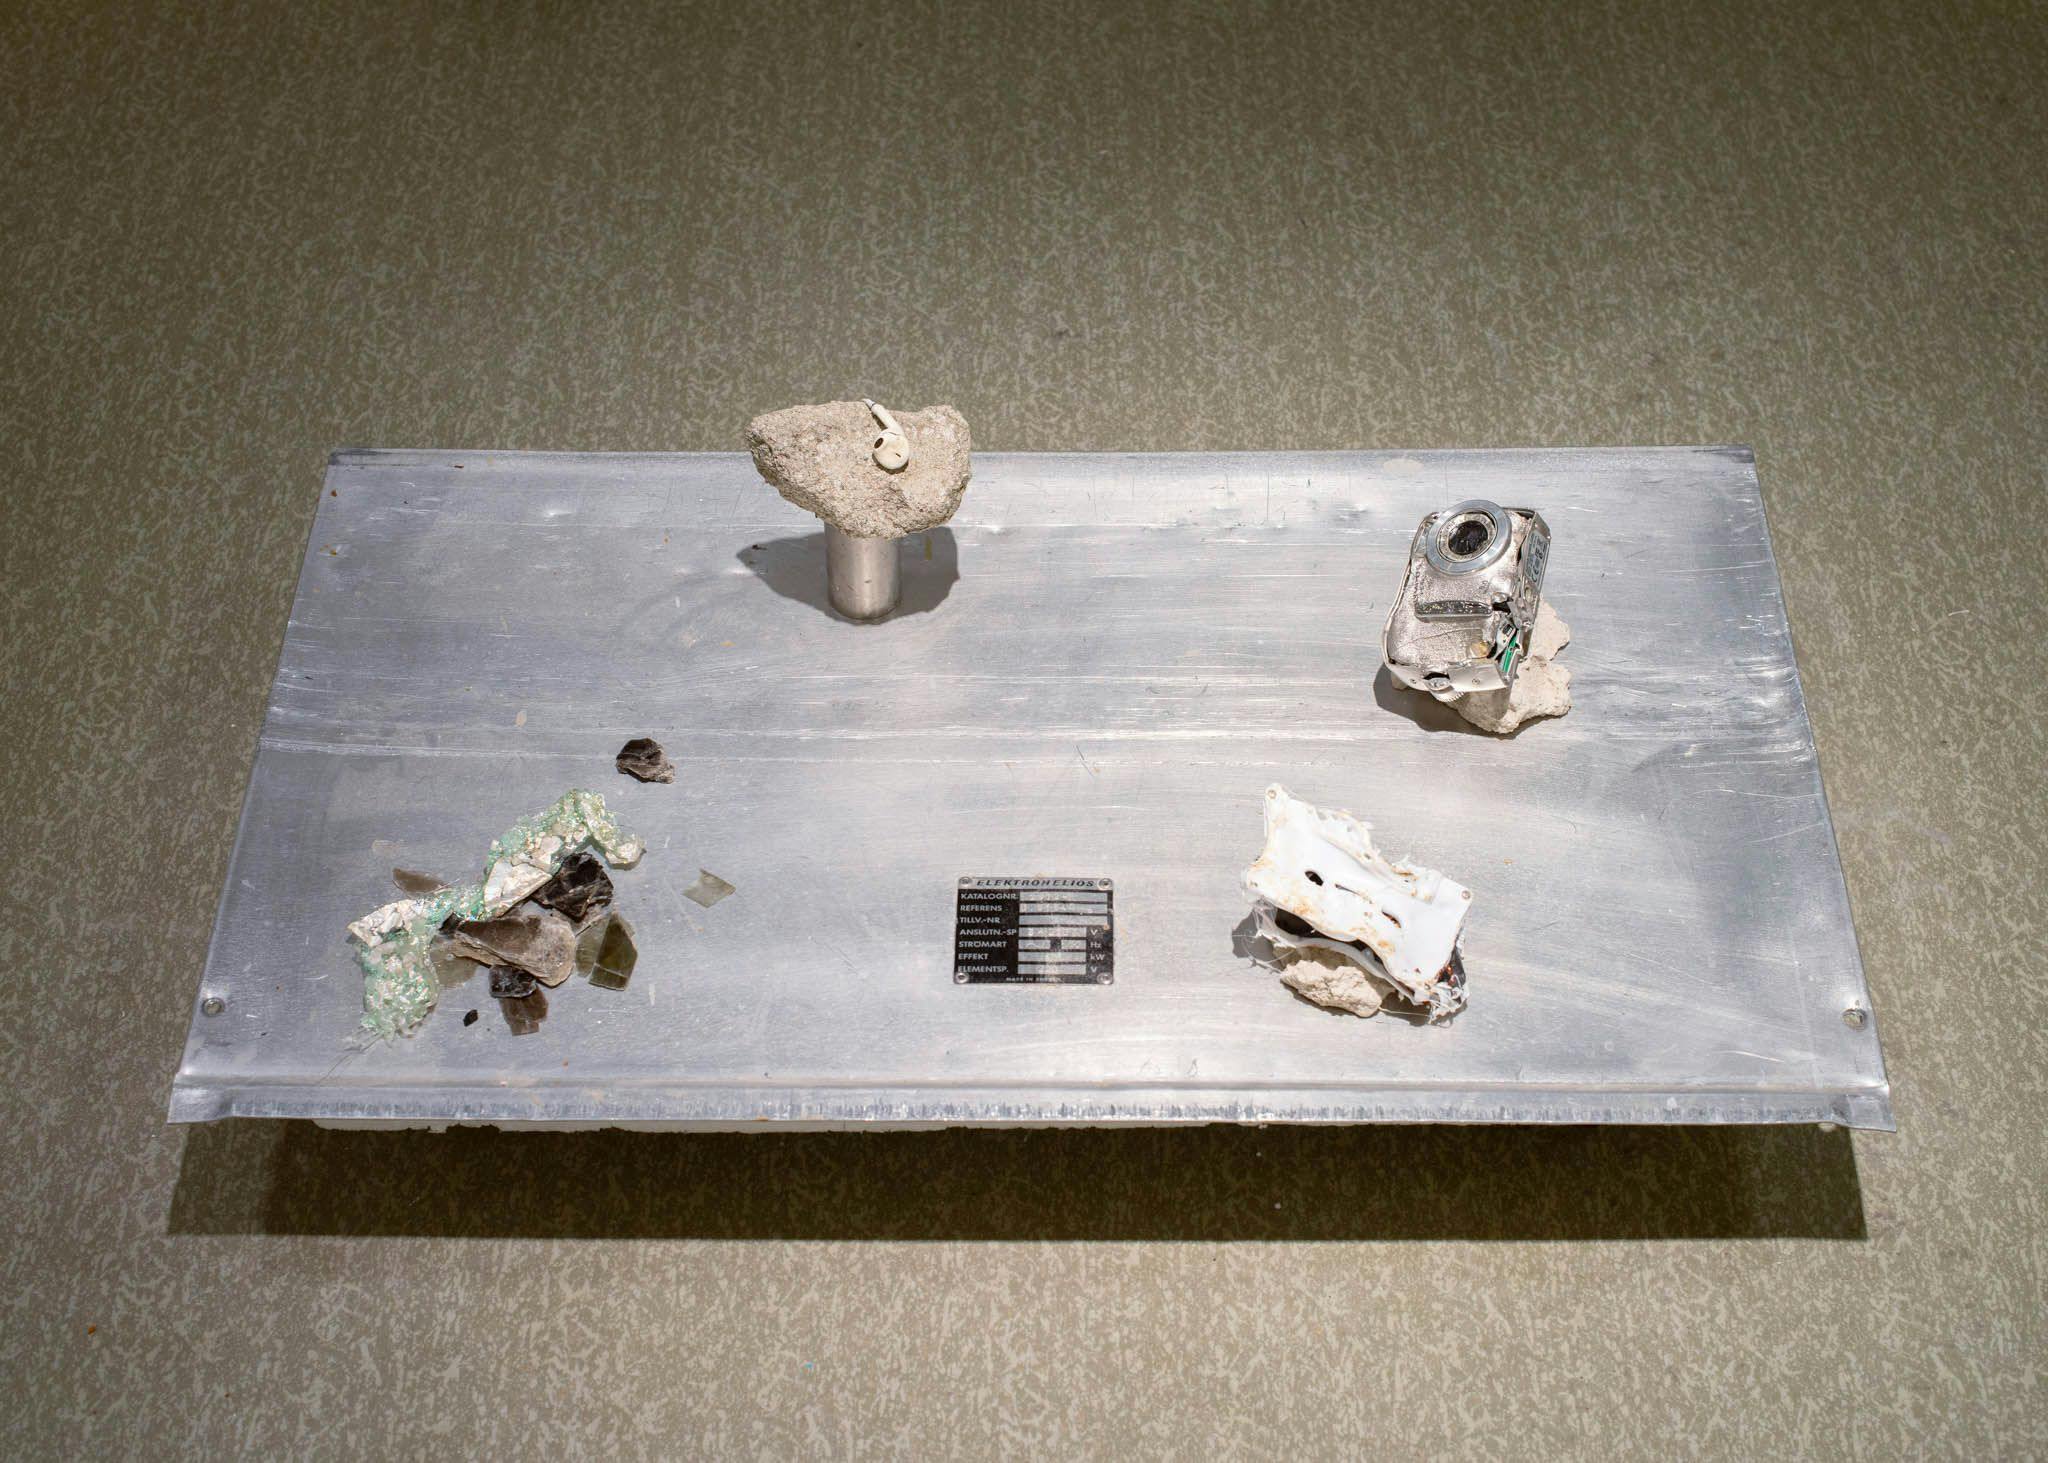 Various melted objects are displayed on an aluminium sheet.